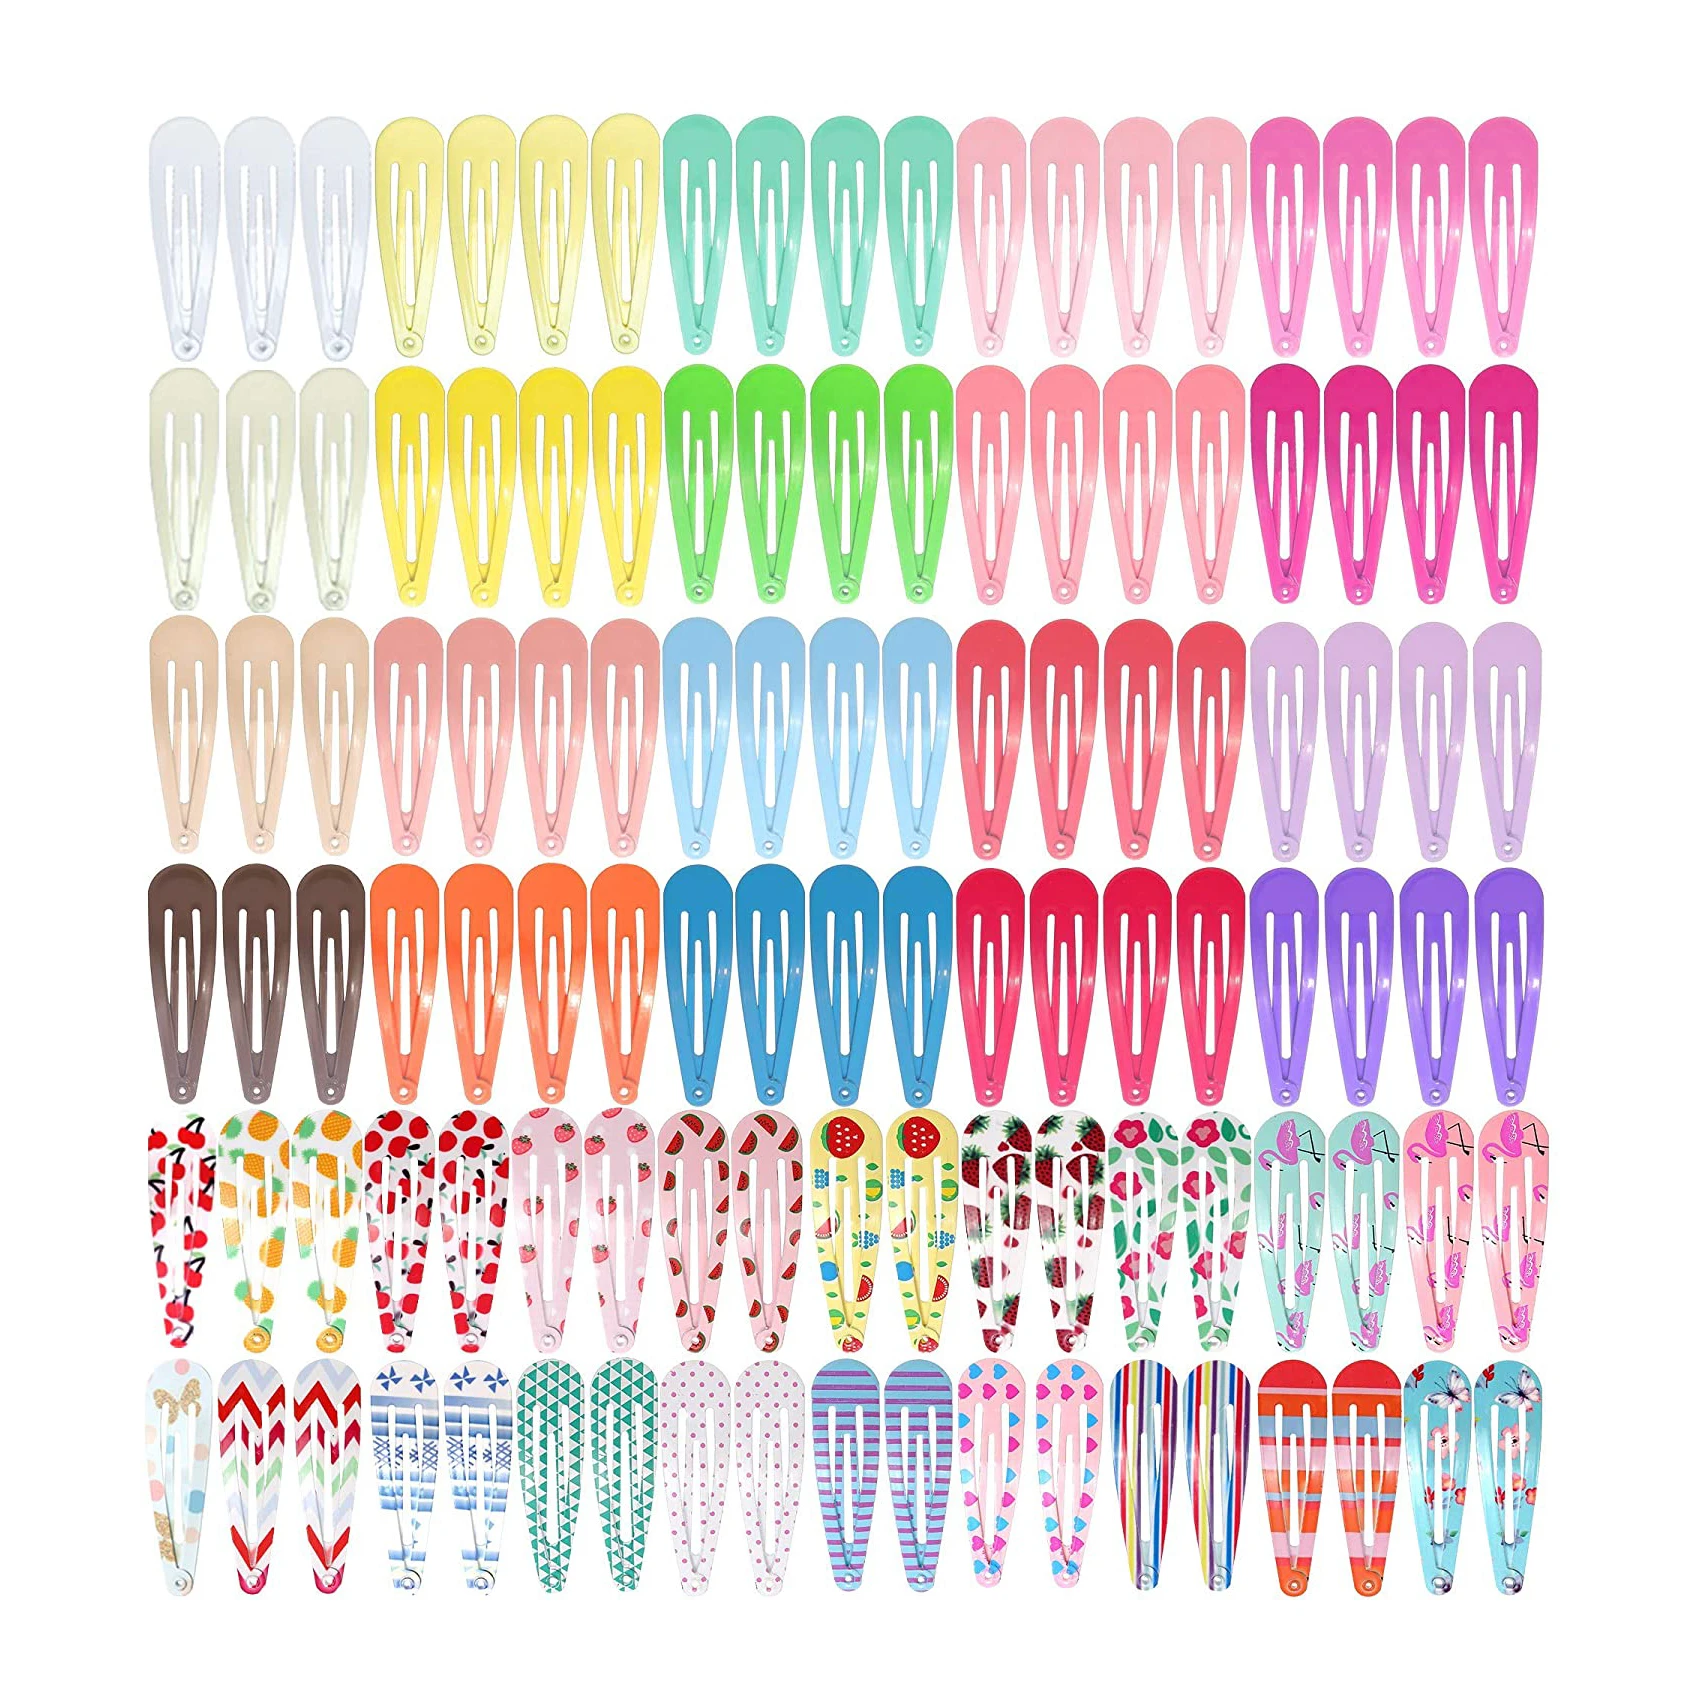 Top quality Blank Hair Barrette Snap Clips for hair accessories